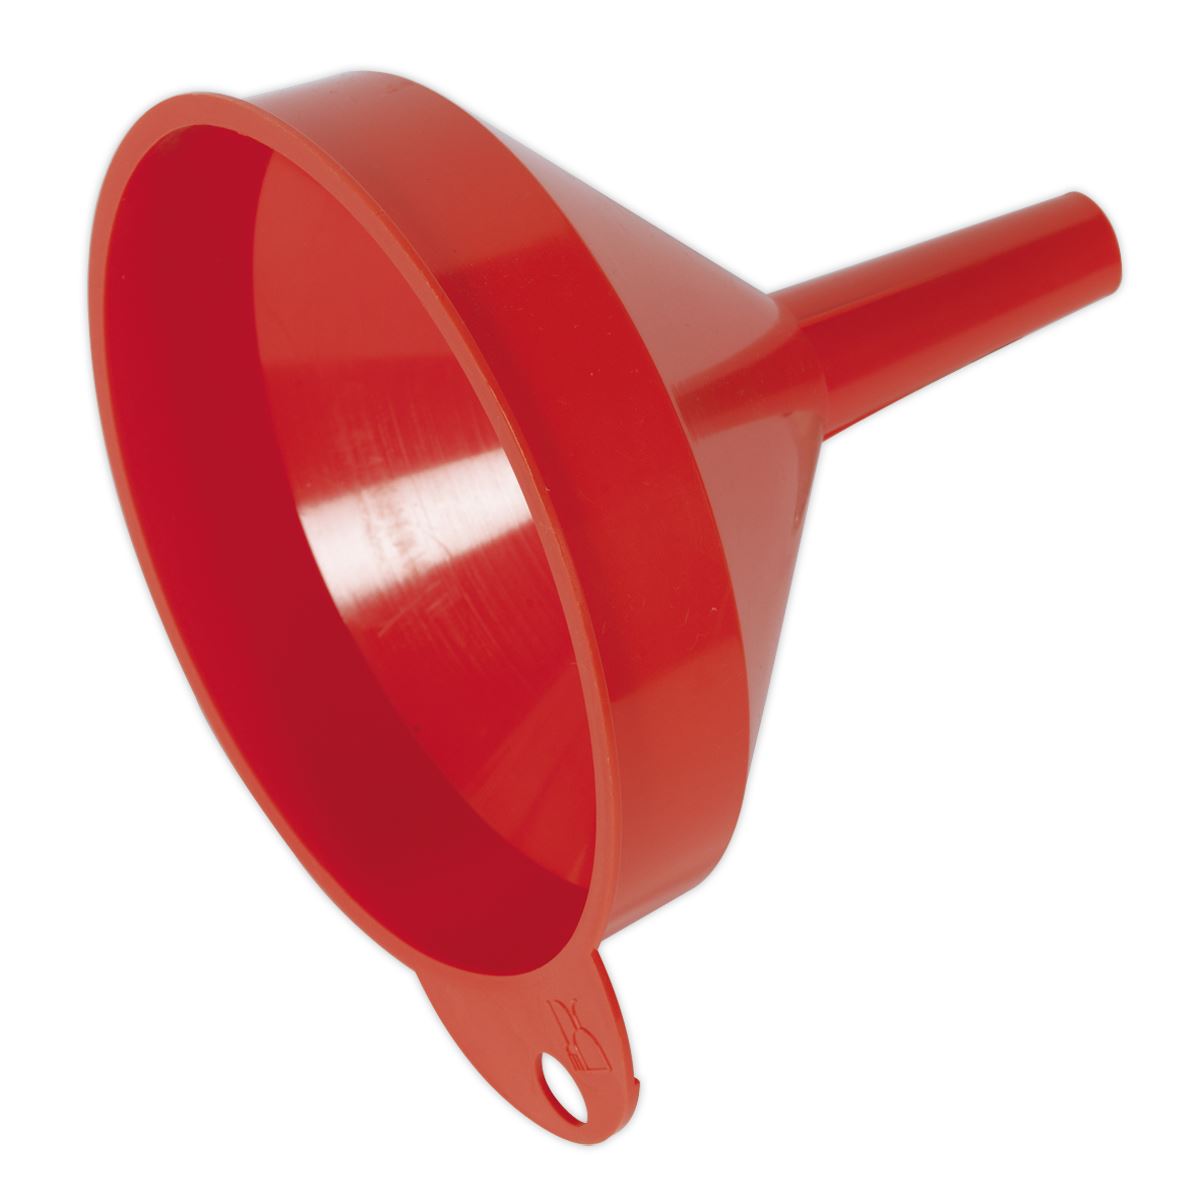 Sealey Funnel Small Ø120mm Fixed Spout